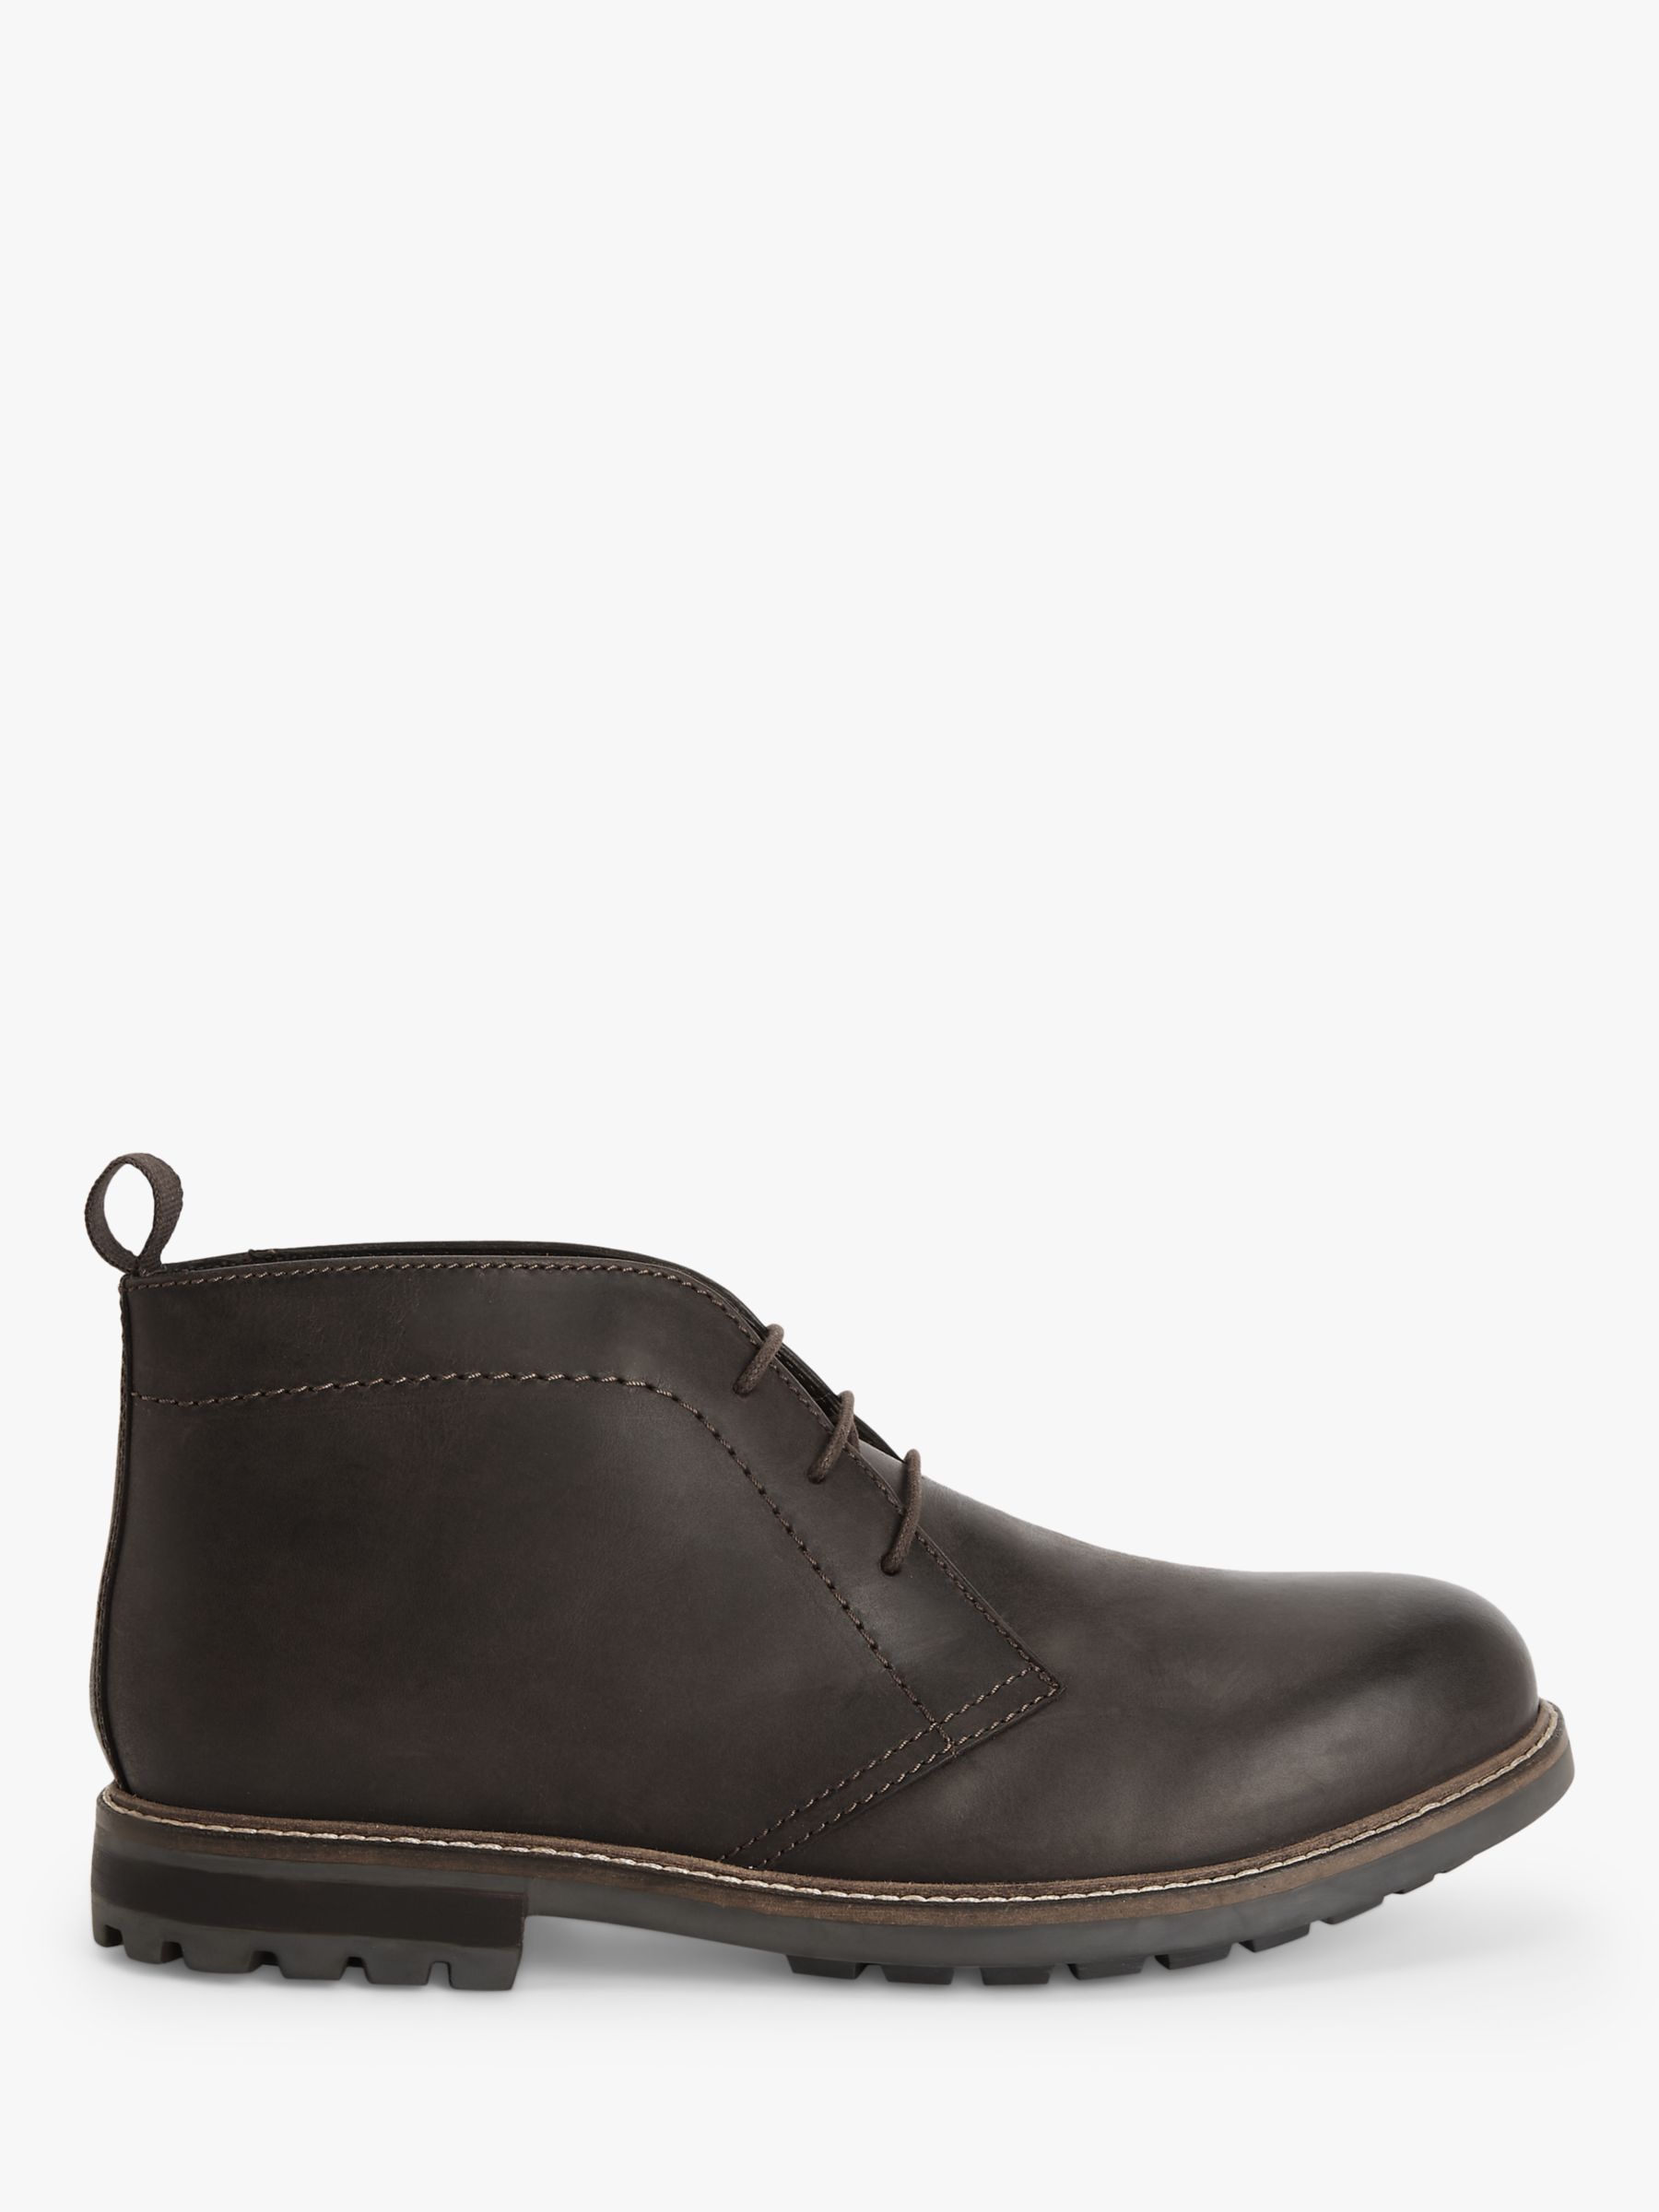 John Lewis Leather Lace Up Chukka Boots, Dark Brown, 8